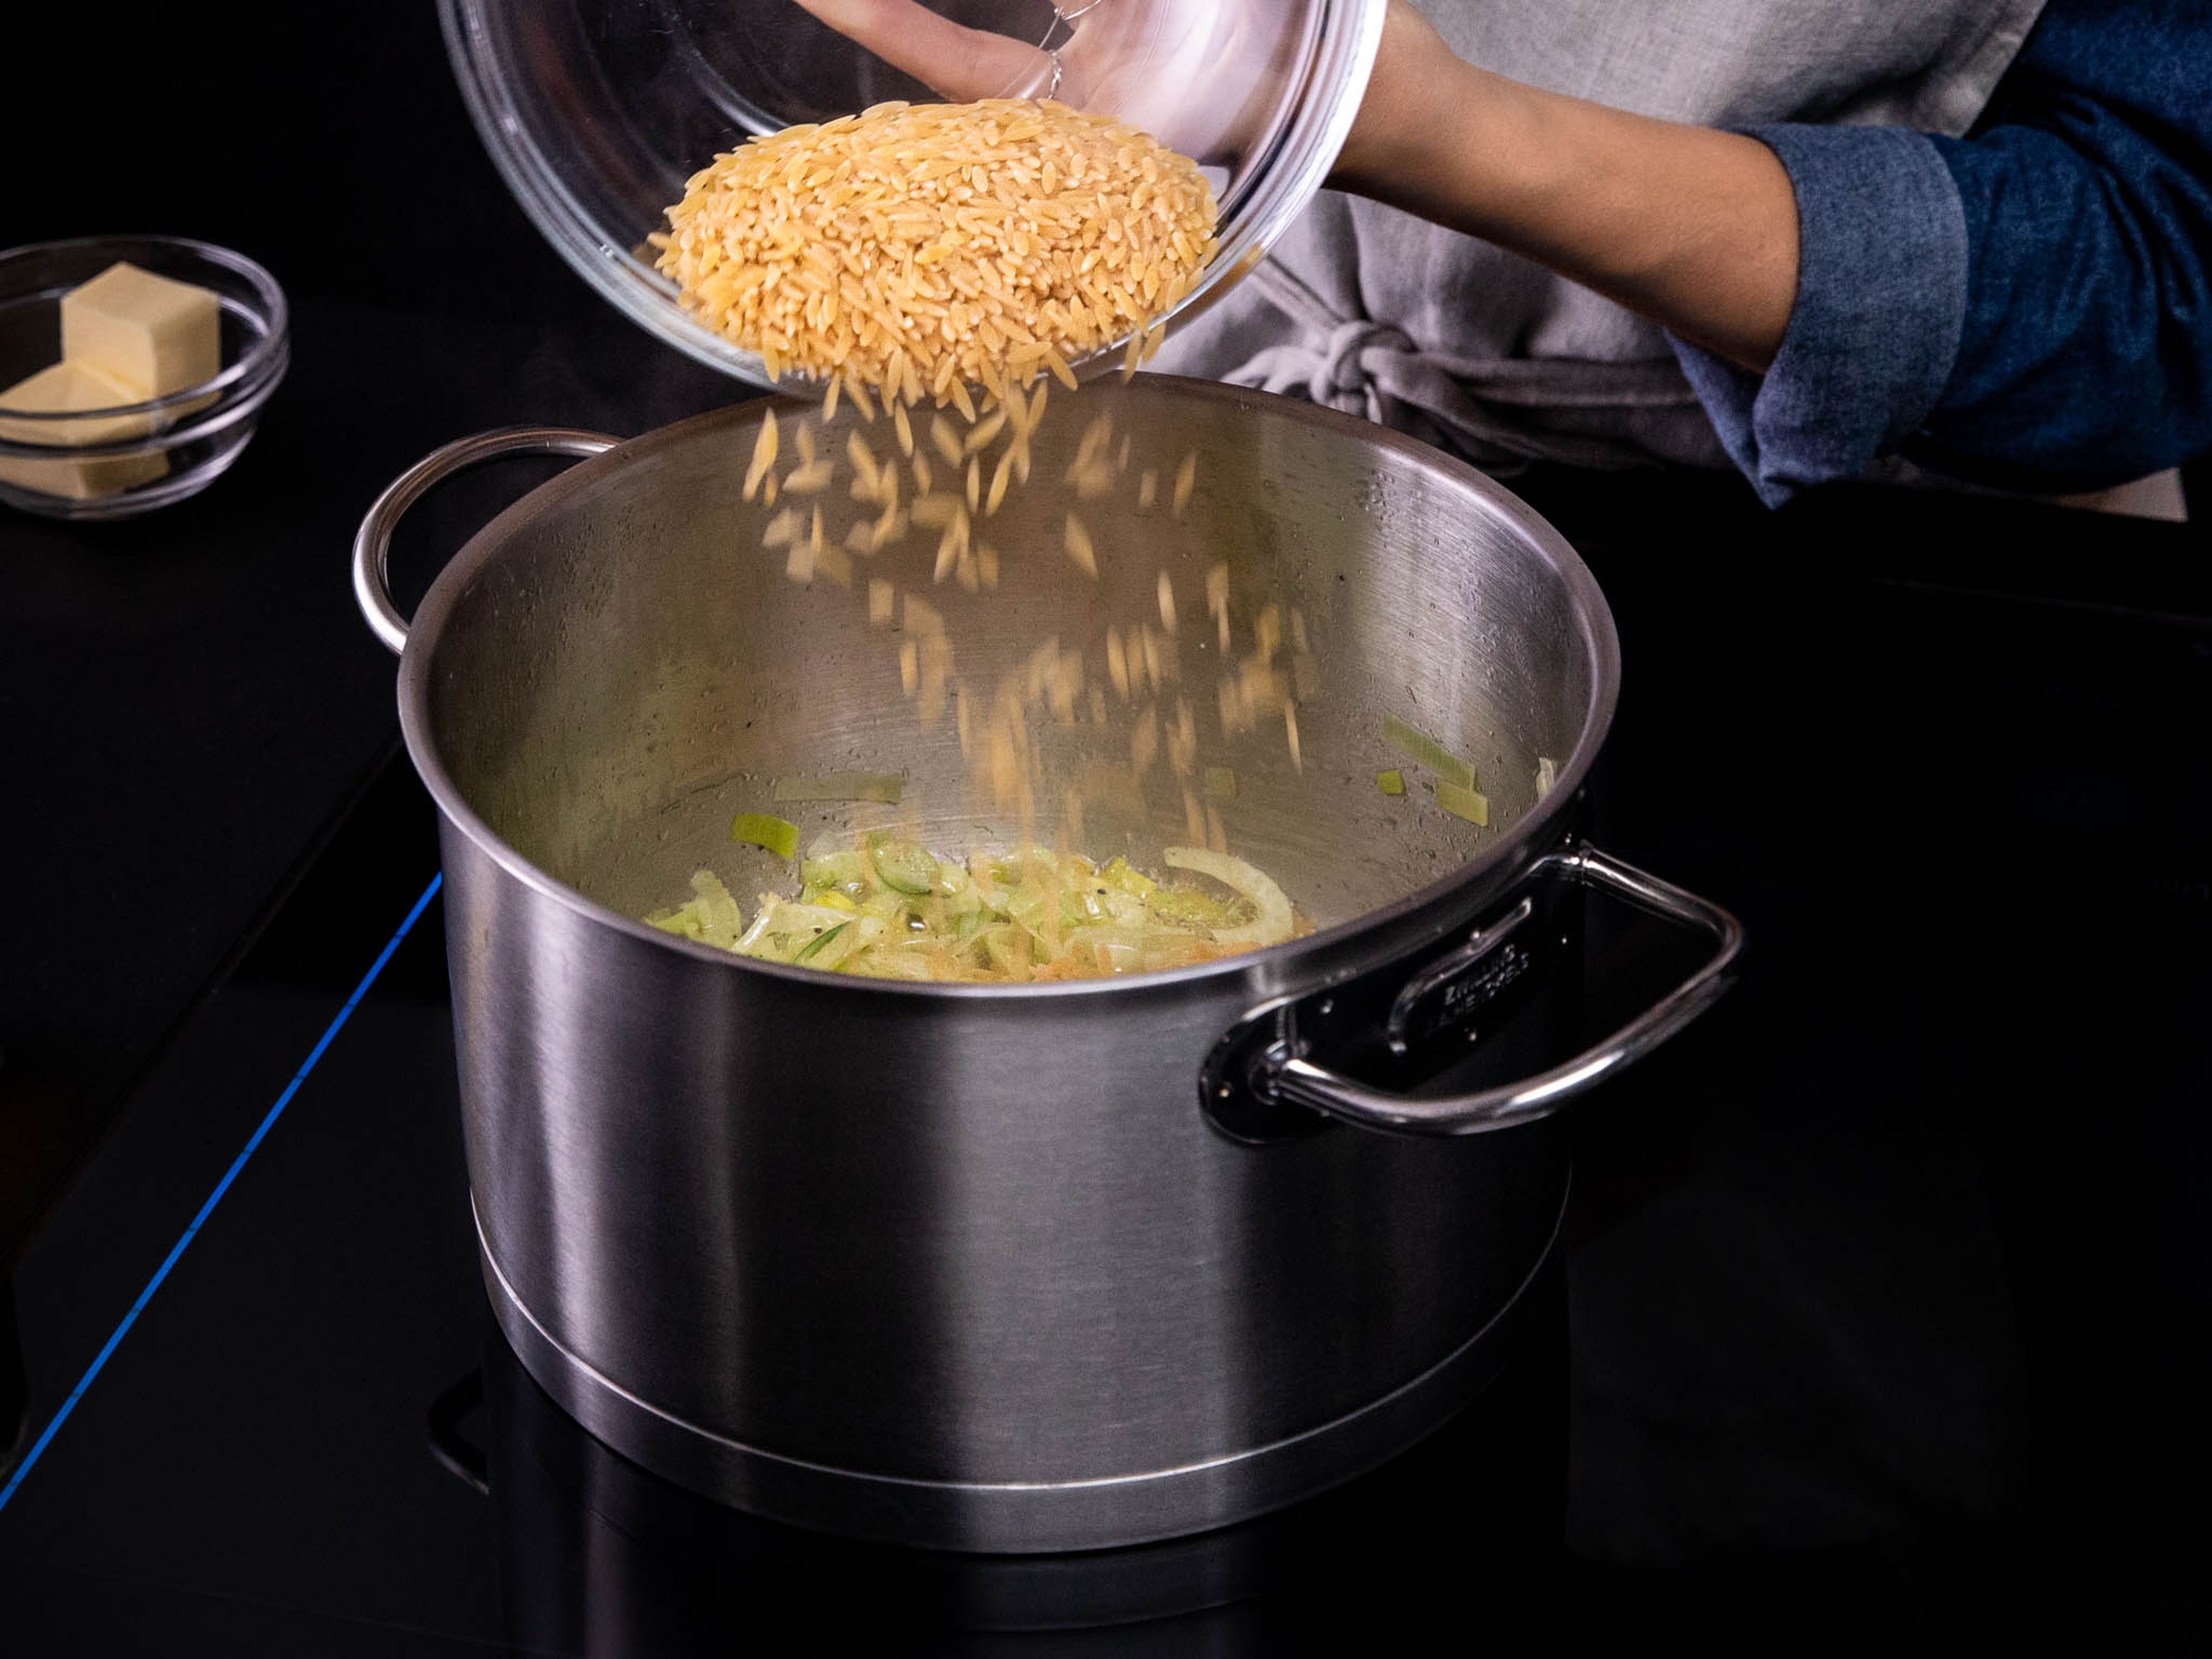 In a pot over medium heat, add half the butter and a bit of olive oil. Once the butter is melted, add leek and fennel. Season with salt and pepper and sauté for approx. 8 min., or until tender and translucent. Then add orzo, stirring to combine, and let cook for approx. 3 min.